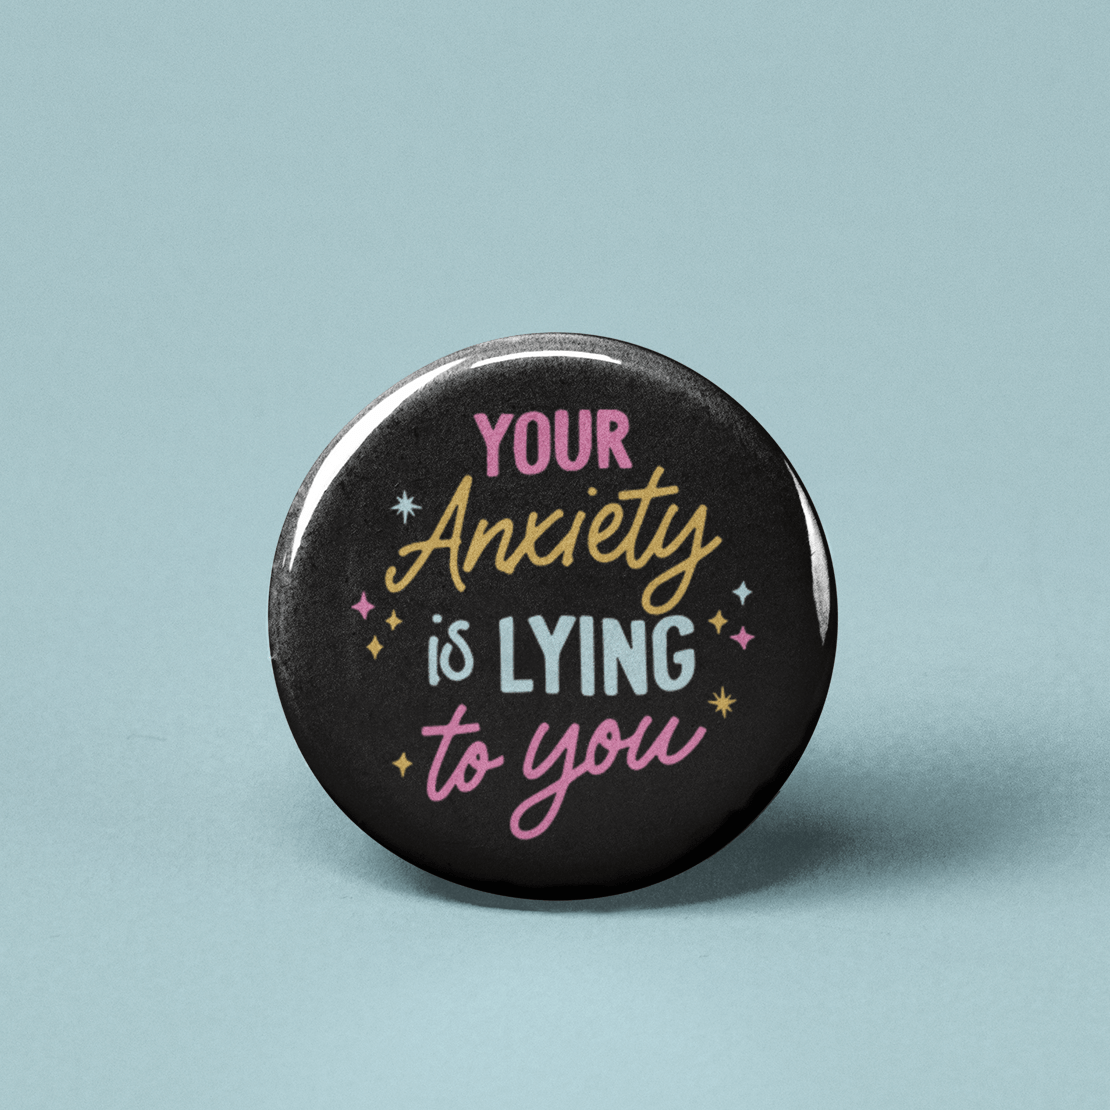 Your Anxiety is Lying to You V2 Pinback Button - Spiral Circle